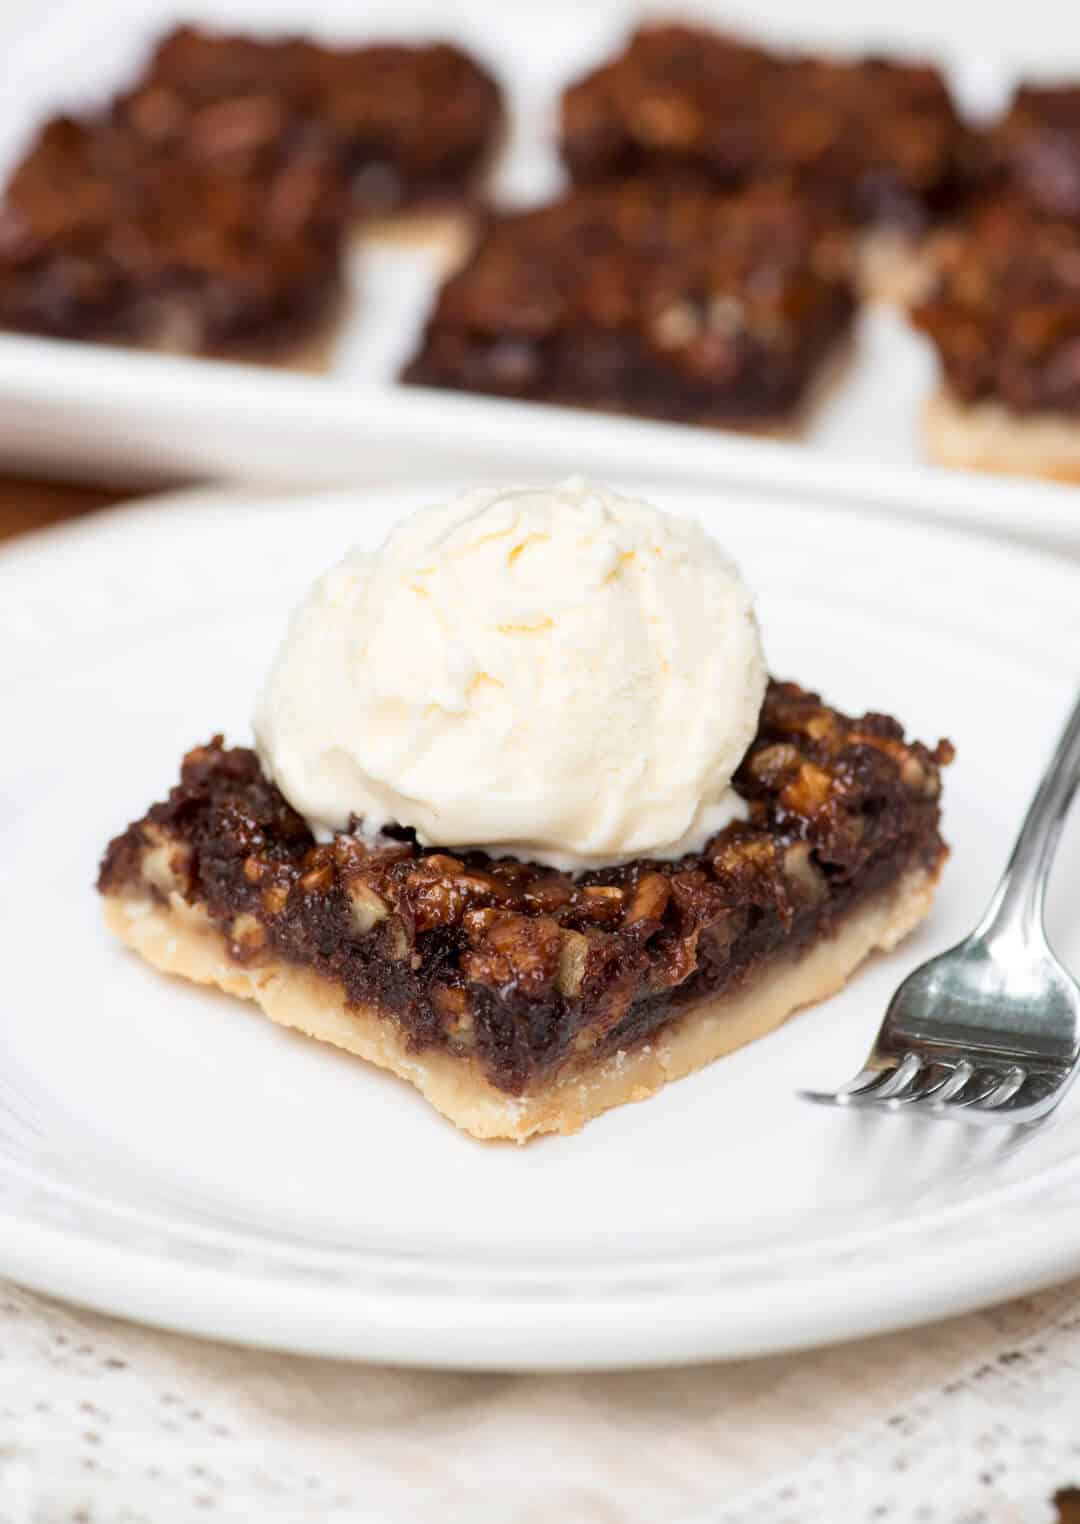 These Chocolate Bourbon Pecan Pie Bars have a shortbread crust topped with a gooey, chocolaty, bourbon-spiked pecan topping that is downright heavenly. 